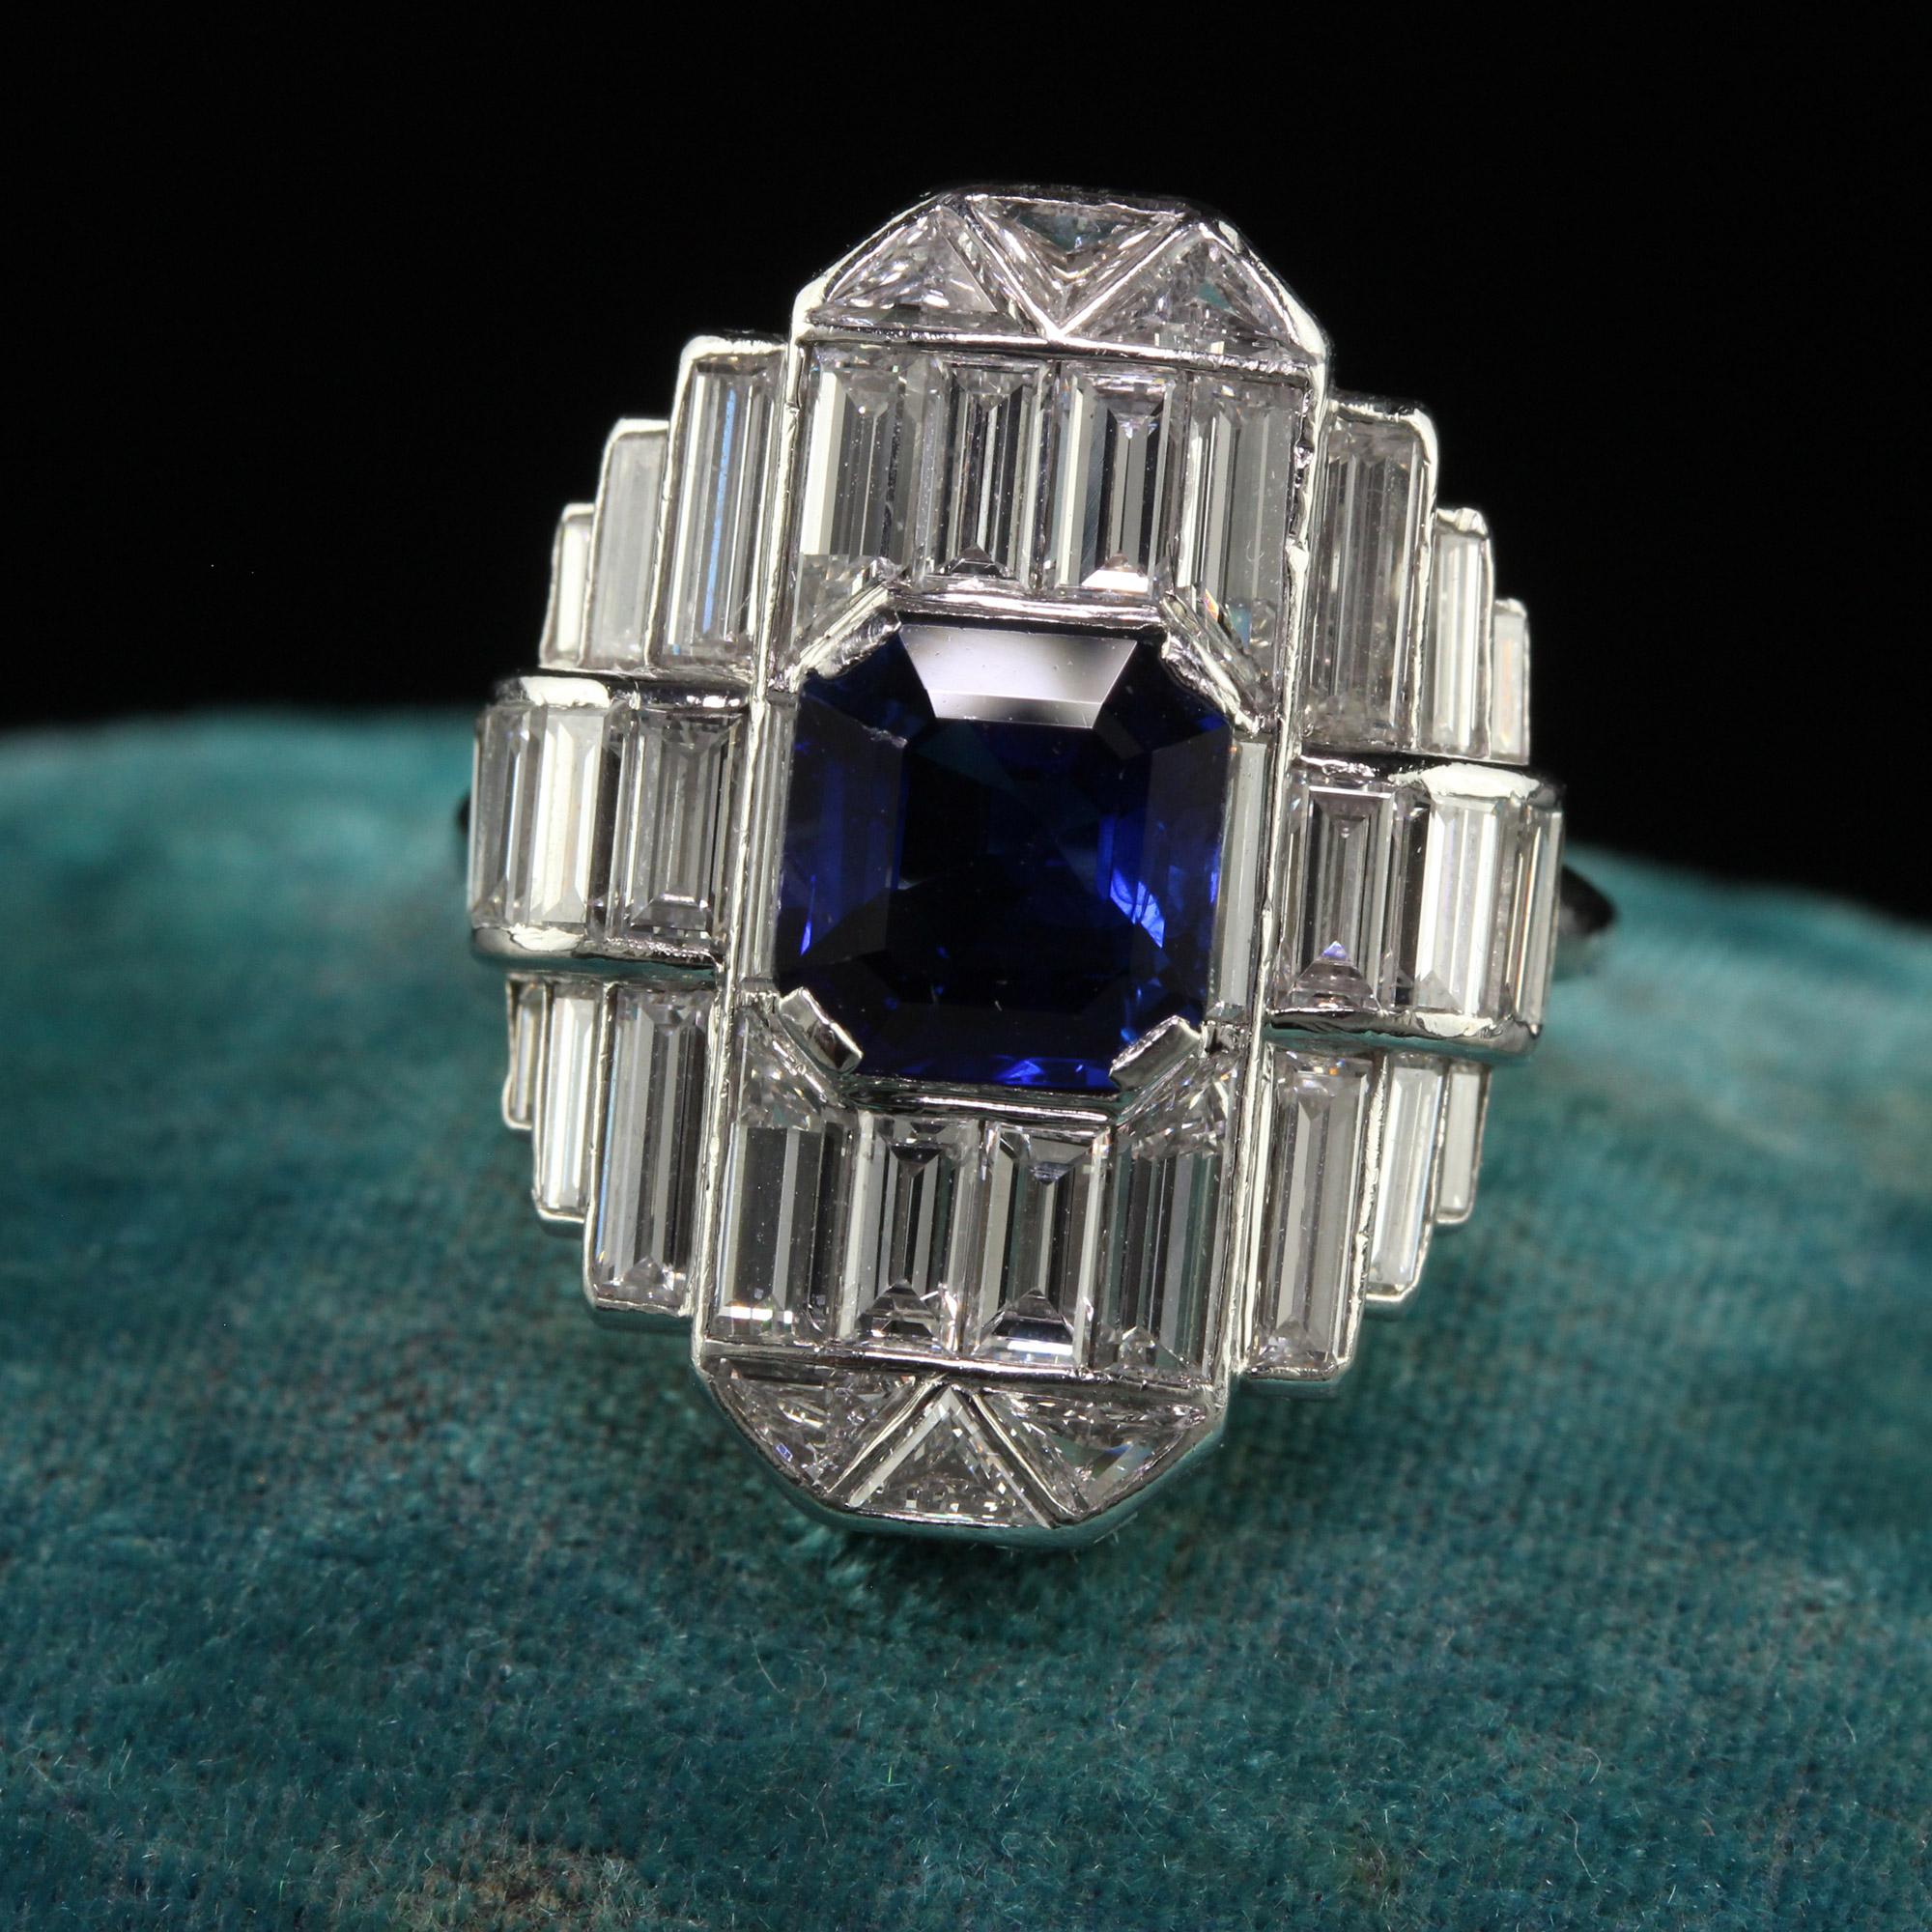 Beautiful Vintage Art Deco Platinum Baguette Diamond and Sapphire Cocktail Ring - GIA. This gorgeous Art Deco cocktail ring is crafted in platinum. The center holds a natural royal blue sapphire that has a GIA report and has white baguette cut